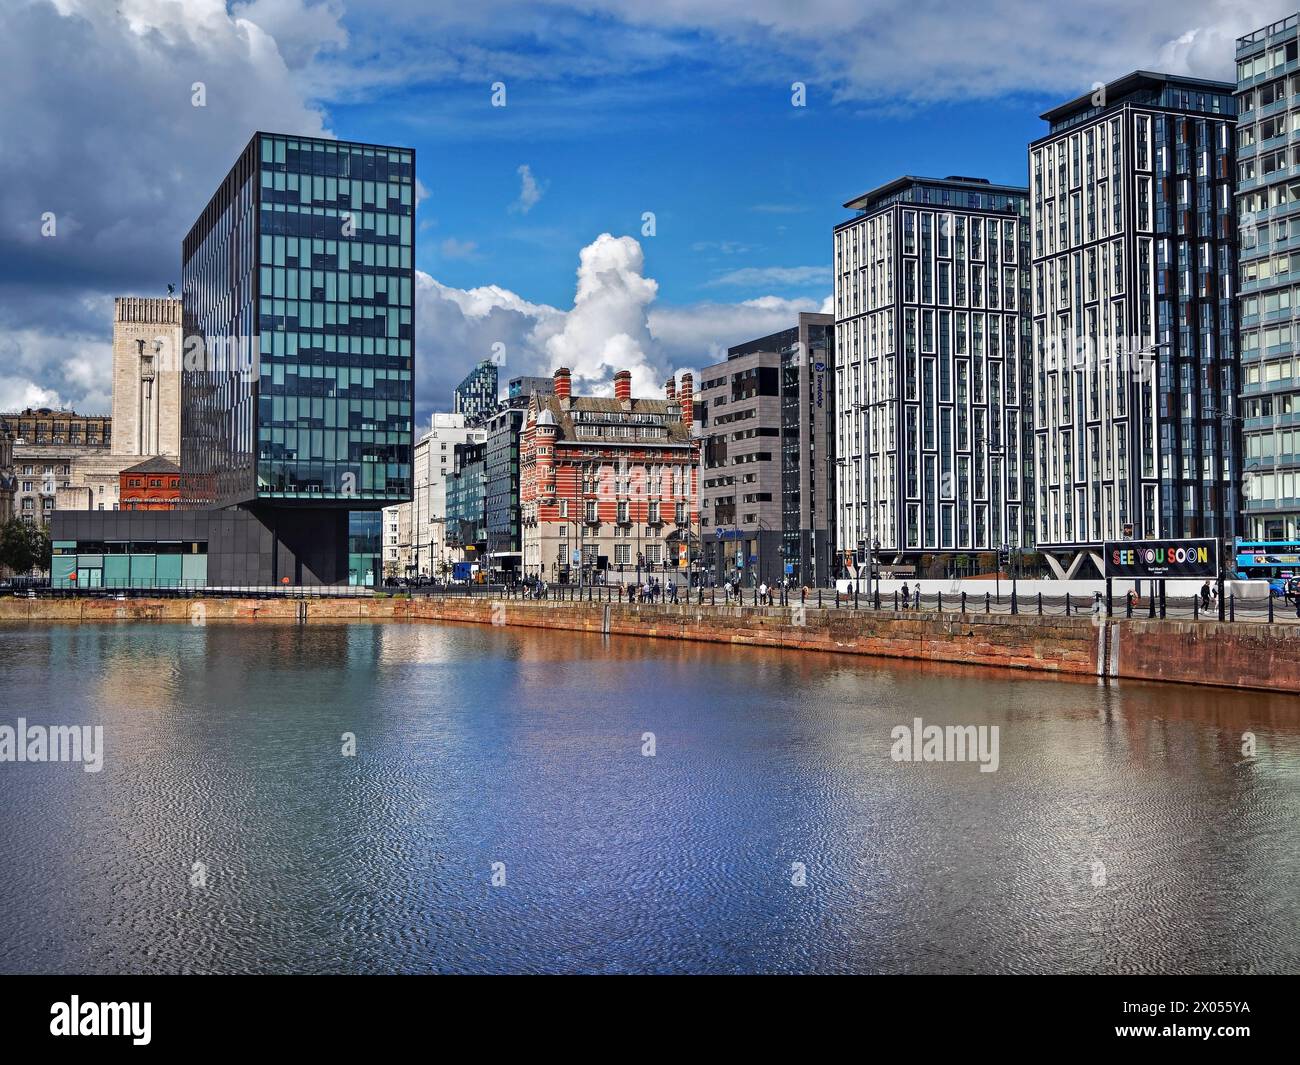 UK, Liverpool, Canning Dock and Waterfront Buildings. Stock Photo